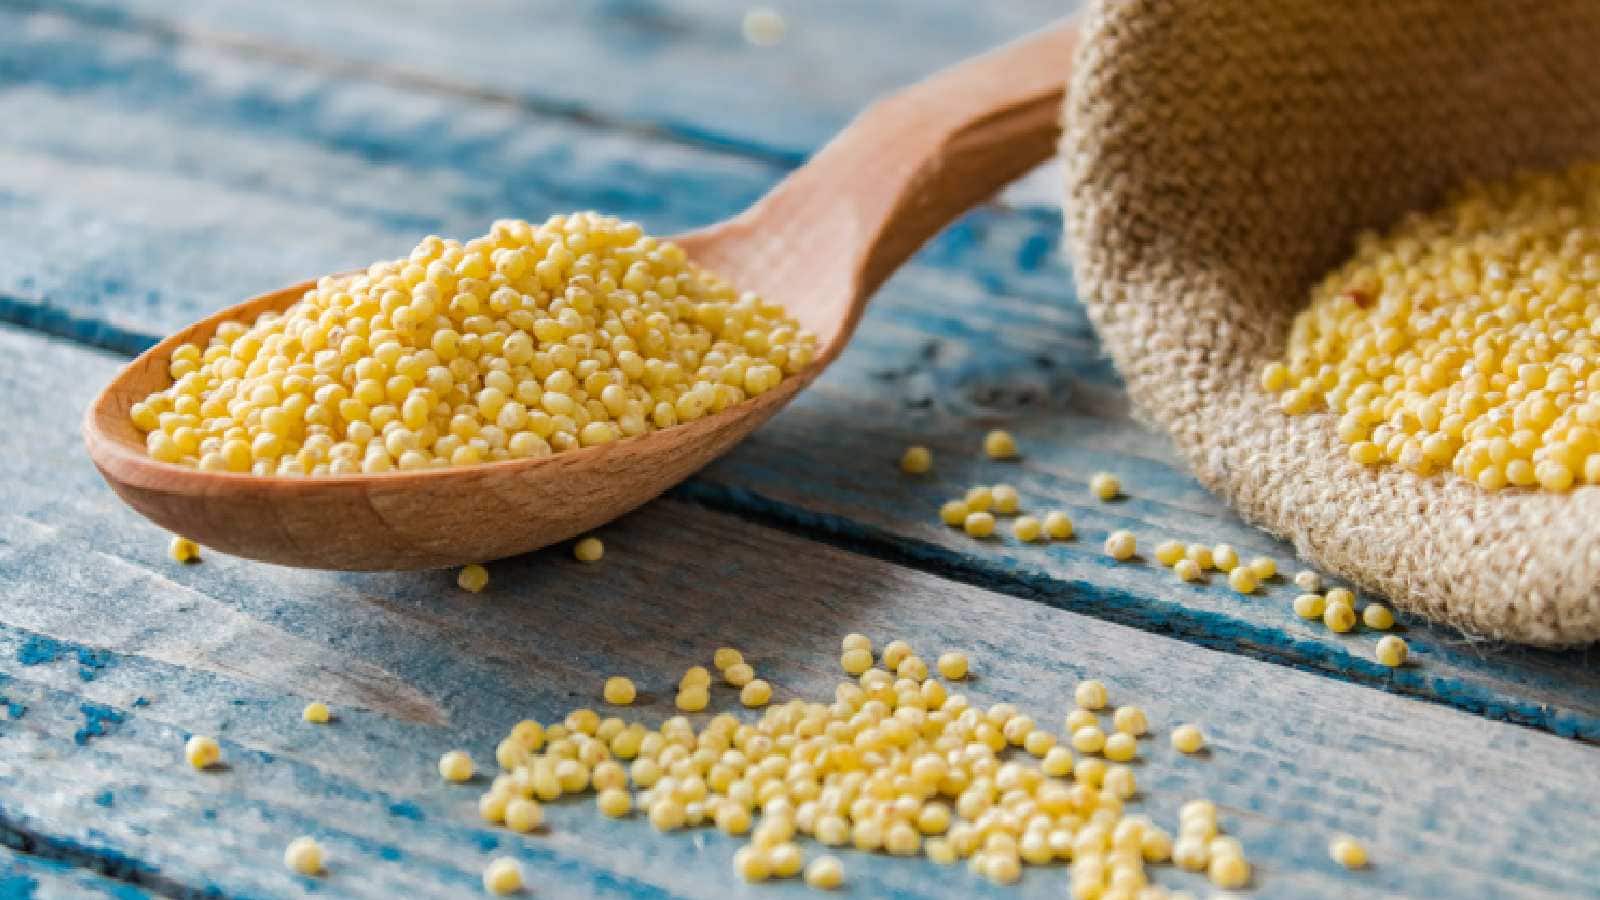 11 Awesome Reasons to Make Millets a Superfood Staple in Your Diet